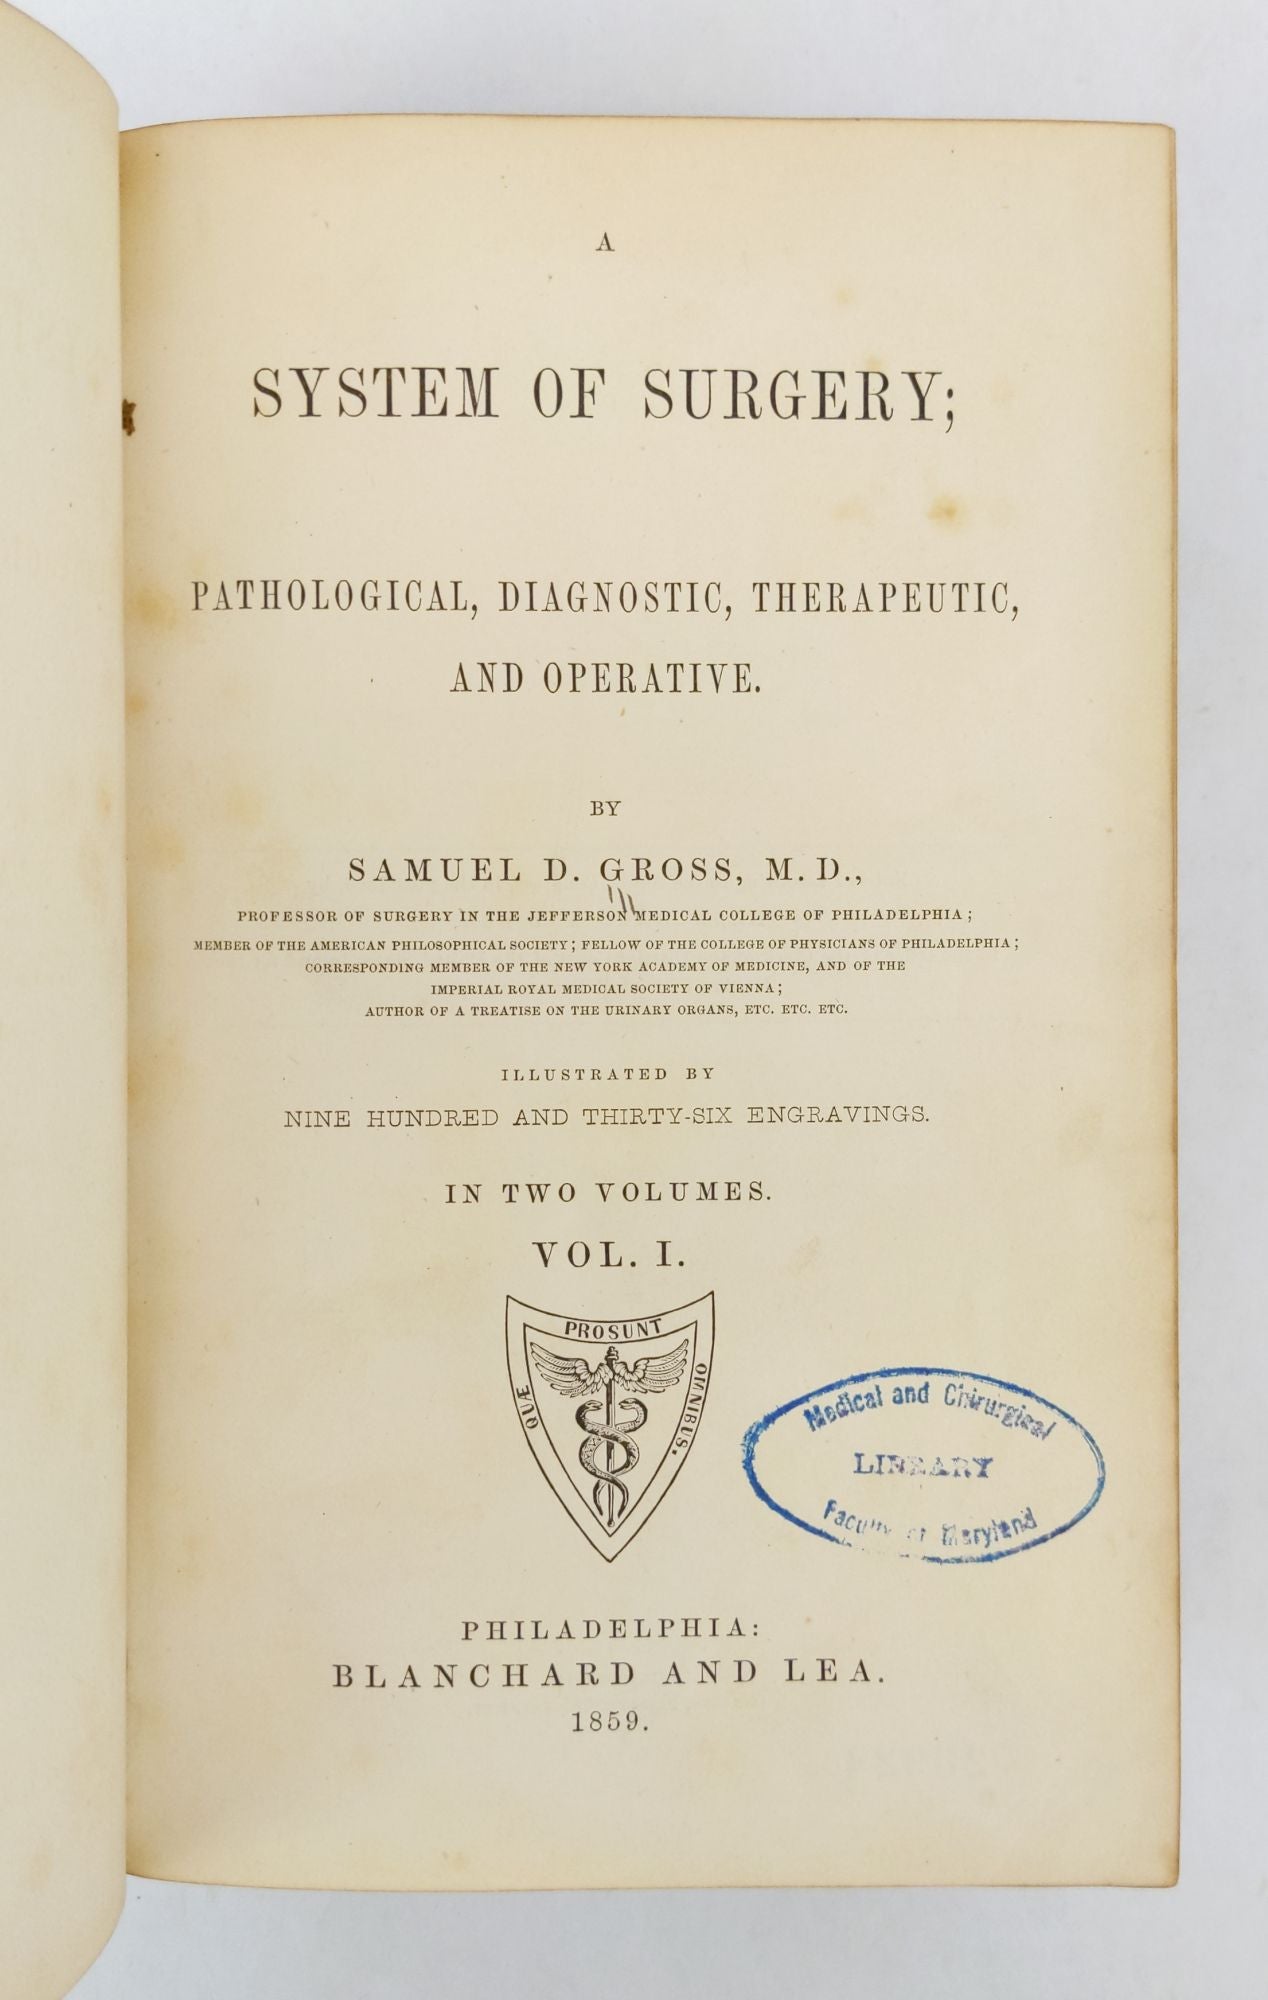 Product Image for A SYSTEM OF SURGERY; PATHOLOGICAL, DIAGNOSTIC, THERAPEUTIC, AND OPERATIVE. ILLUSTRATED BY NINE HUNDRED AND THIRTY-SIX ENGRAVINGS [Two Volumes]